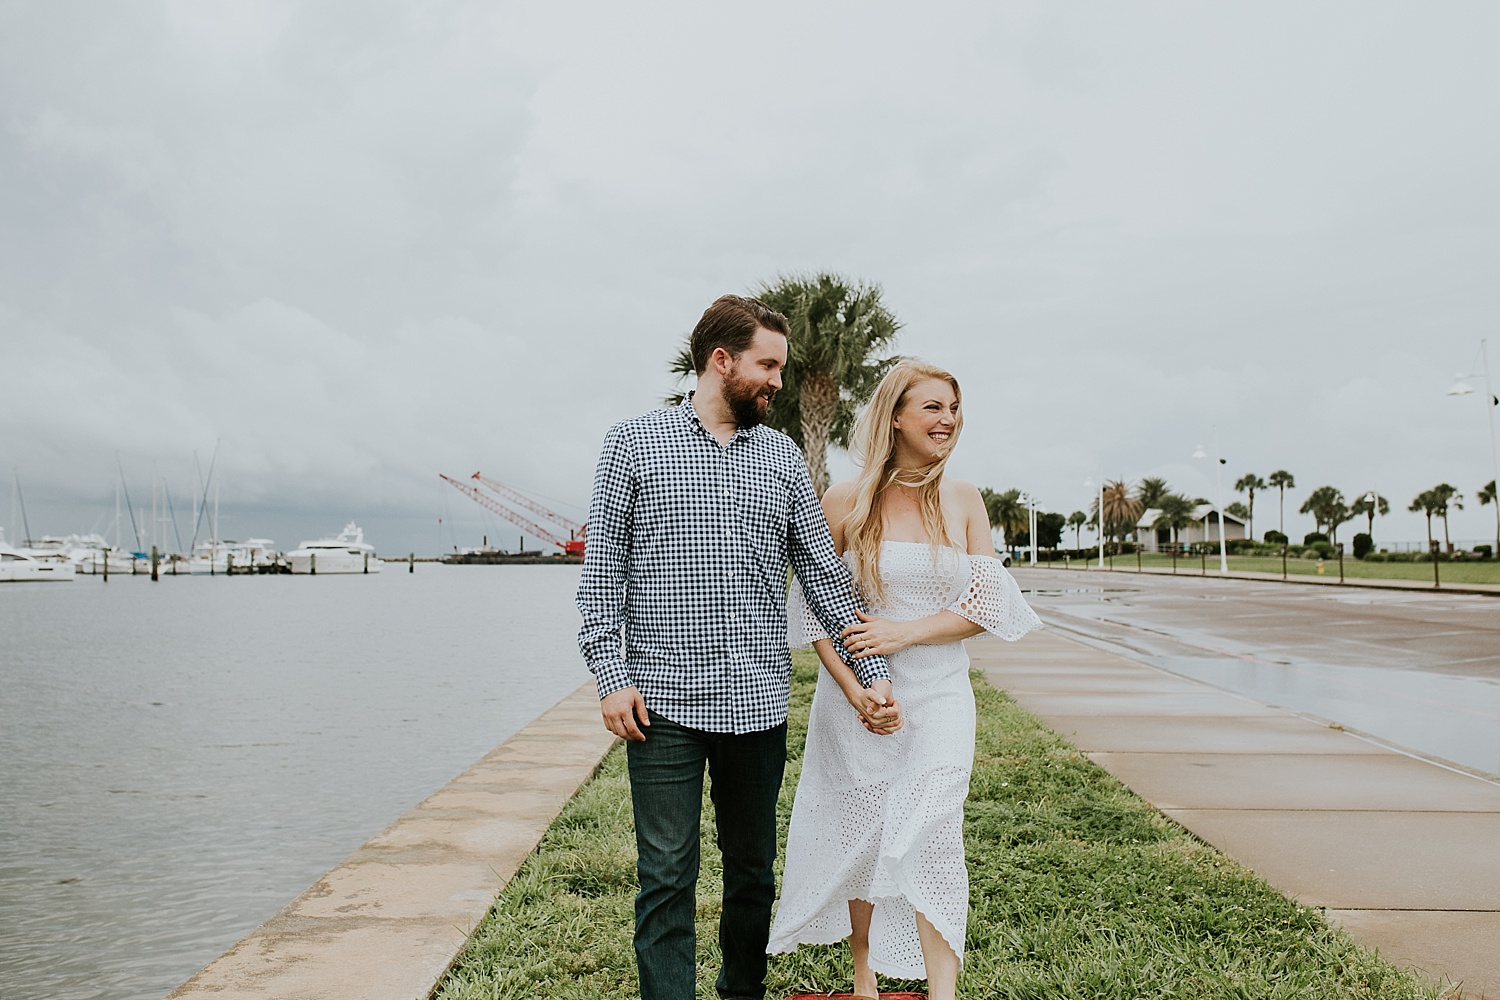 ts engagement photos, wild roots st Pete, wild roots engagement session, ashley izquierdo, st Pete engagement photos, st Pete engagement ideas, tampa engagement photos, tampa engagement ideas, nursery engagement ideas, plant engagement photos, hipster engagement pictures, tampa engagement photographers, tampa wedding photographers, st Petersburg engagement photos, st Petersburg photographers